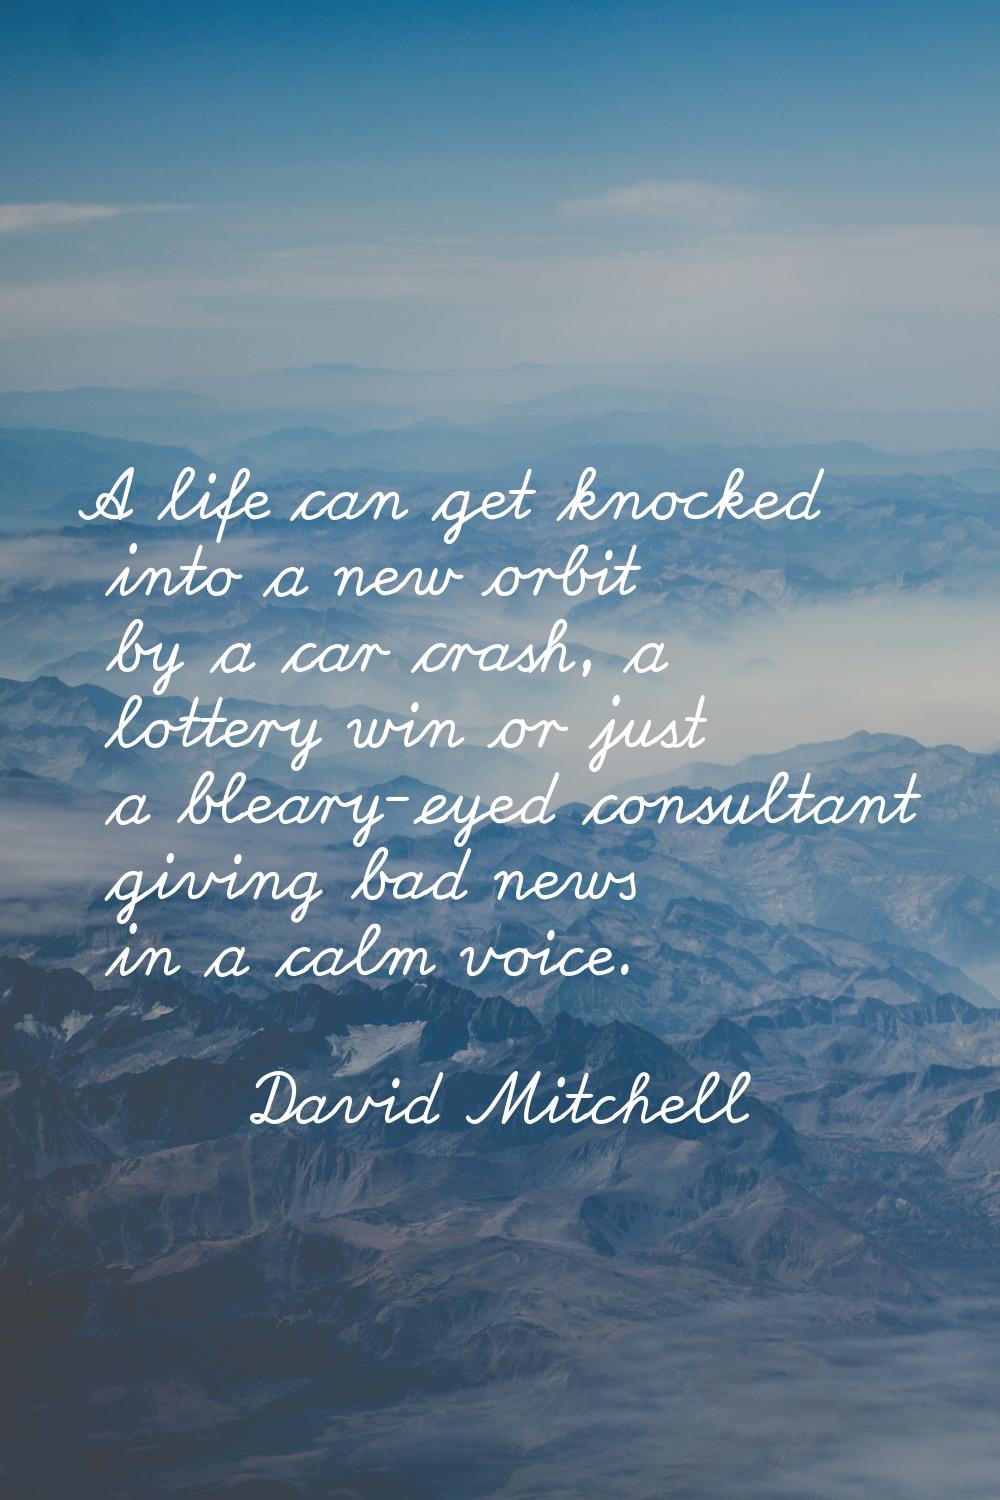 A life can get knocked into a new orbit by a car crash, a lottery win or just a bleary-eyed consult